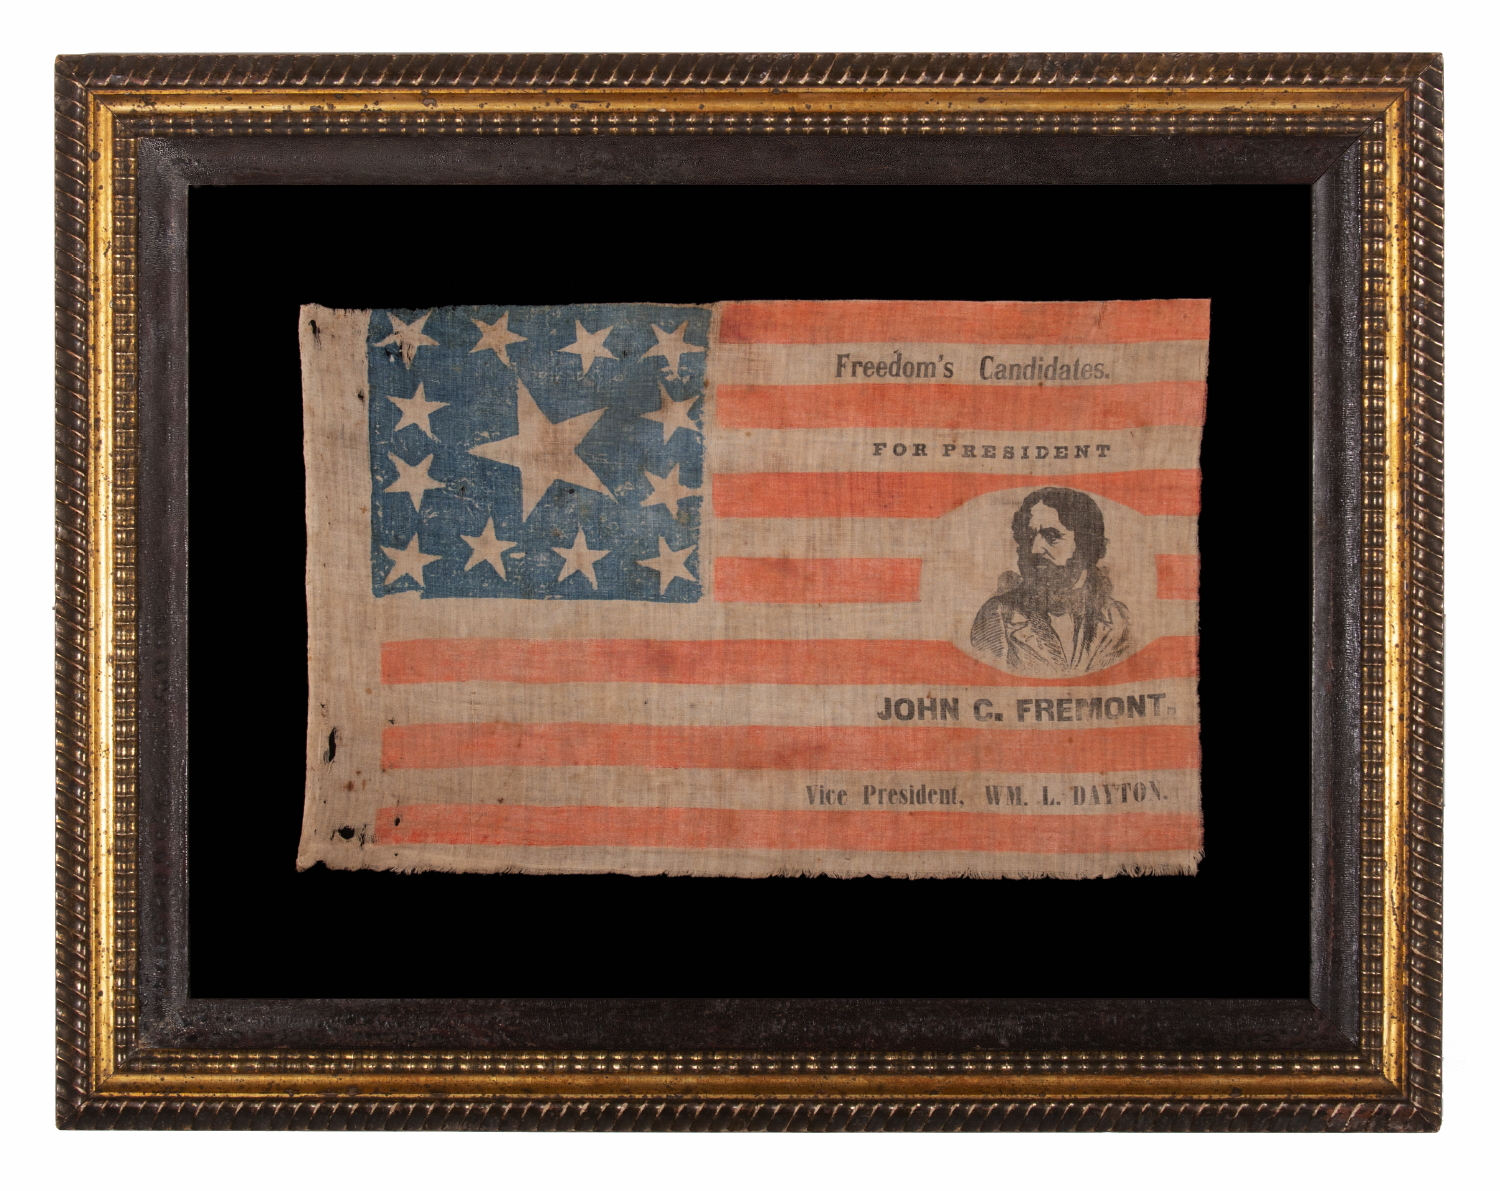 EXTRAORDINARILY RARE, PORTRAIT STYLE PARADE FLAG, MADE FOR THE PRESIDENTIAL CAMPAIGN OF JOHN FRÉMONT, WHO OPENED THE GATEWAY TO CALIFORNIA STATEHOOD, WAS THE REPUBLICAN PARTY’S FIRST PRESIDENTIAL CANDIDATE, AND RAN ON AN ANTI-SLAVERY PLATFORM; DISPLAYING 13 STARS, ARRANGED IN THE TRUMBULL PATTERN